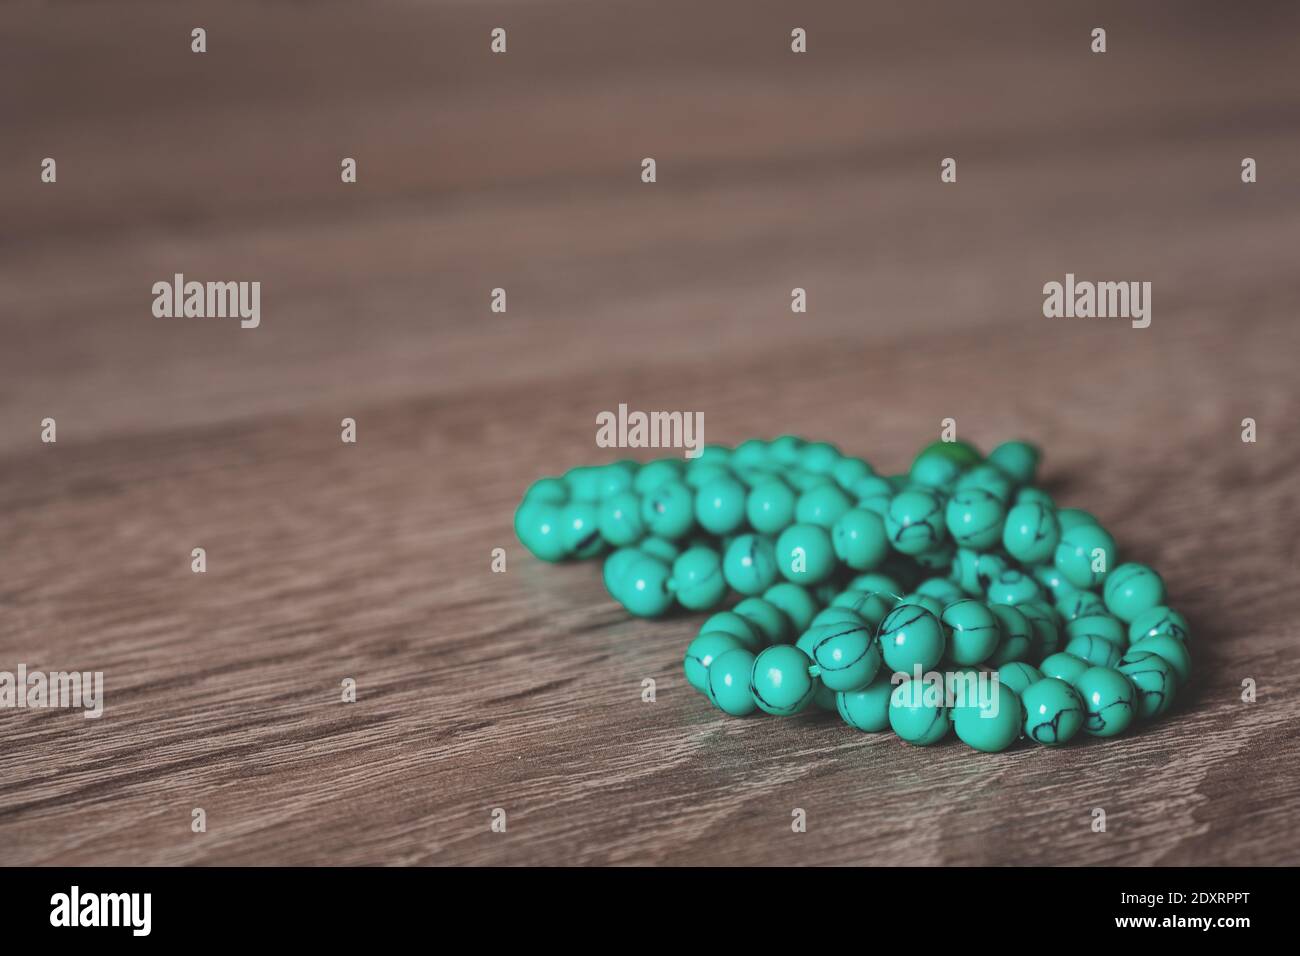 Close-up of a turquoise Buddhist Prayer Beads (called Mala) on a wooden background Stock Photo